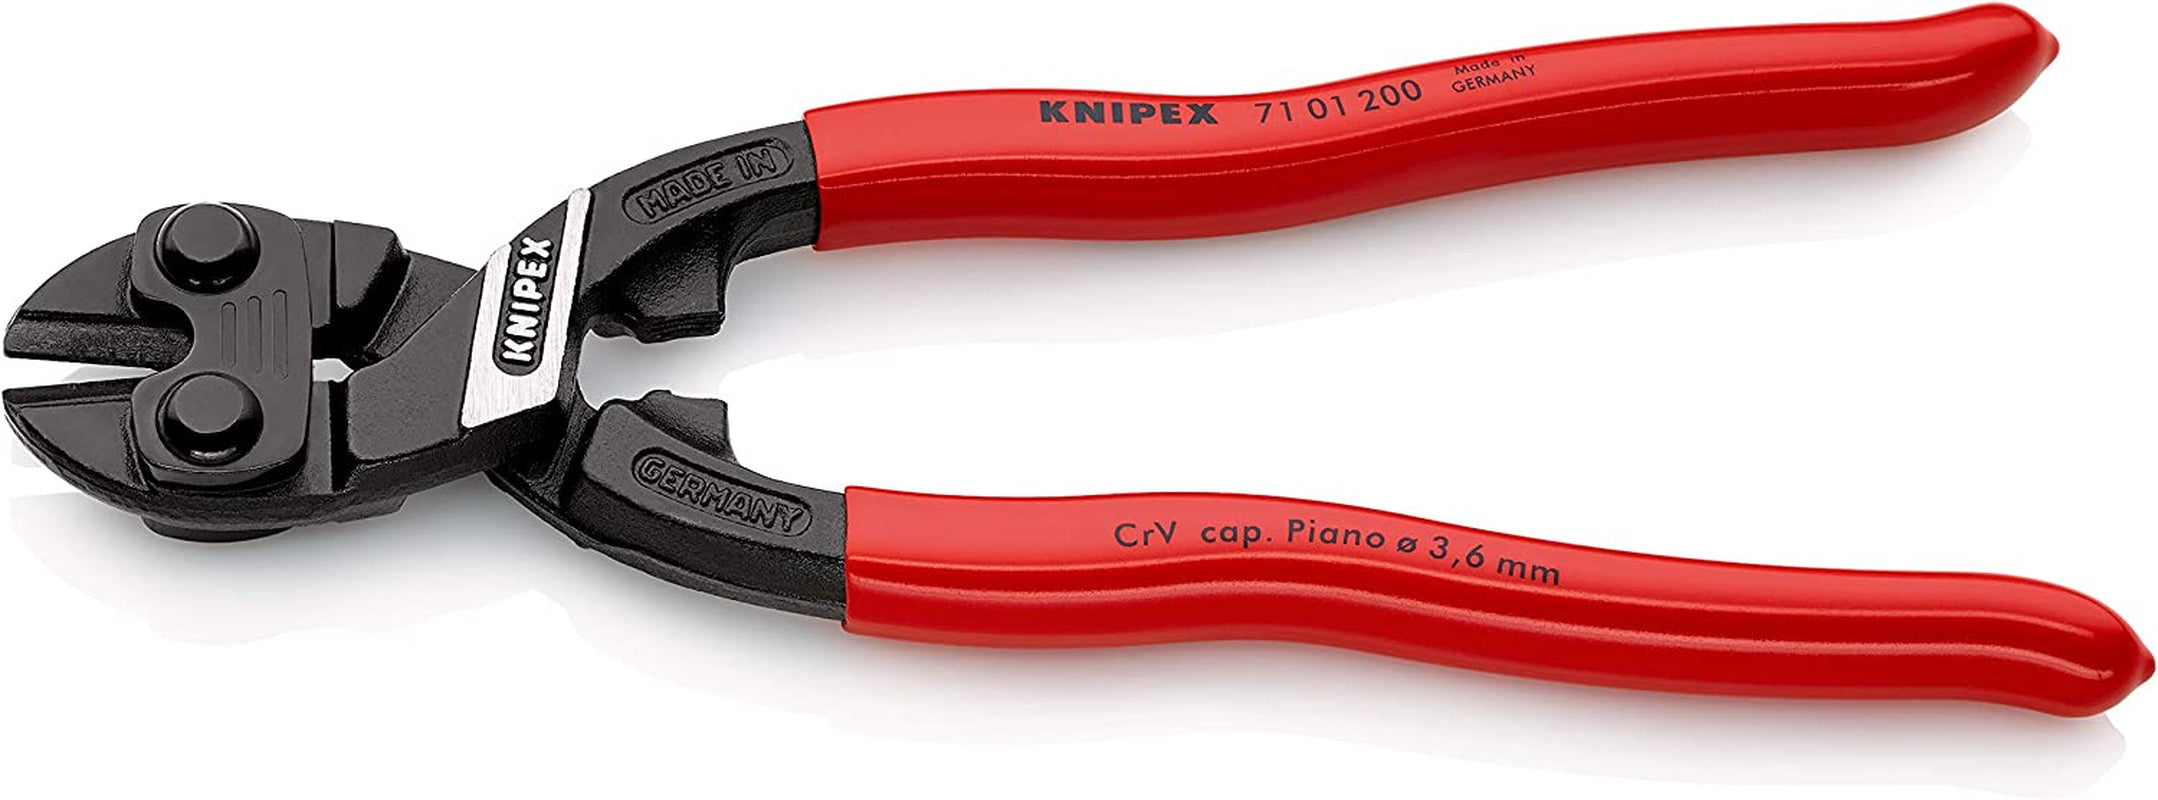 KNIPEX, Knipex 71 01 200 SB Cobolt Compact Bolt Cutters Black Atramentized Plastic Coated, 200 Mm (Blister Packed)